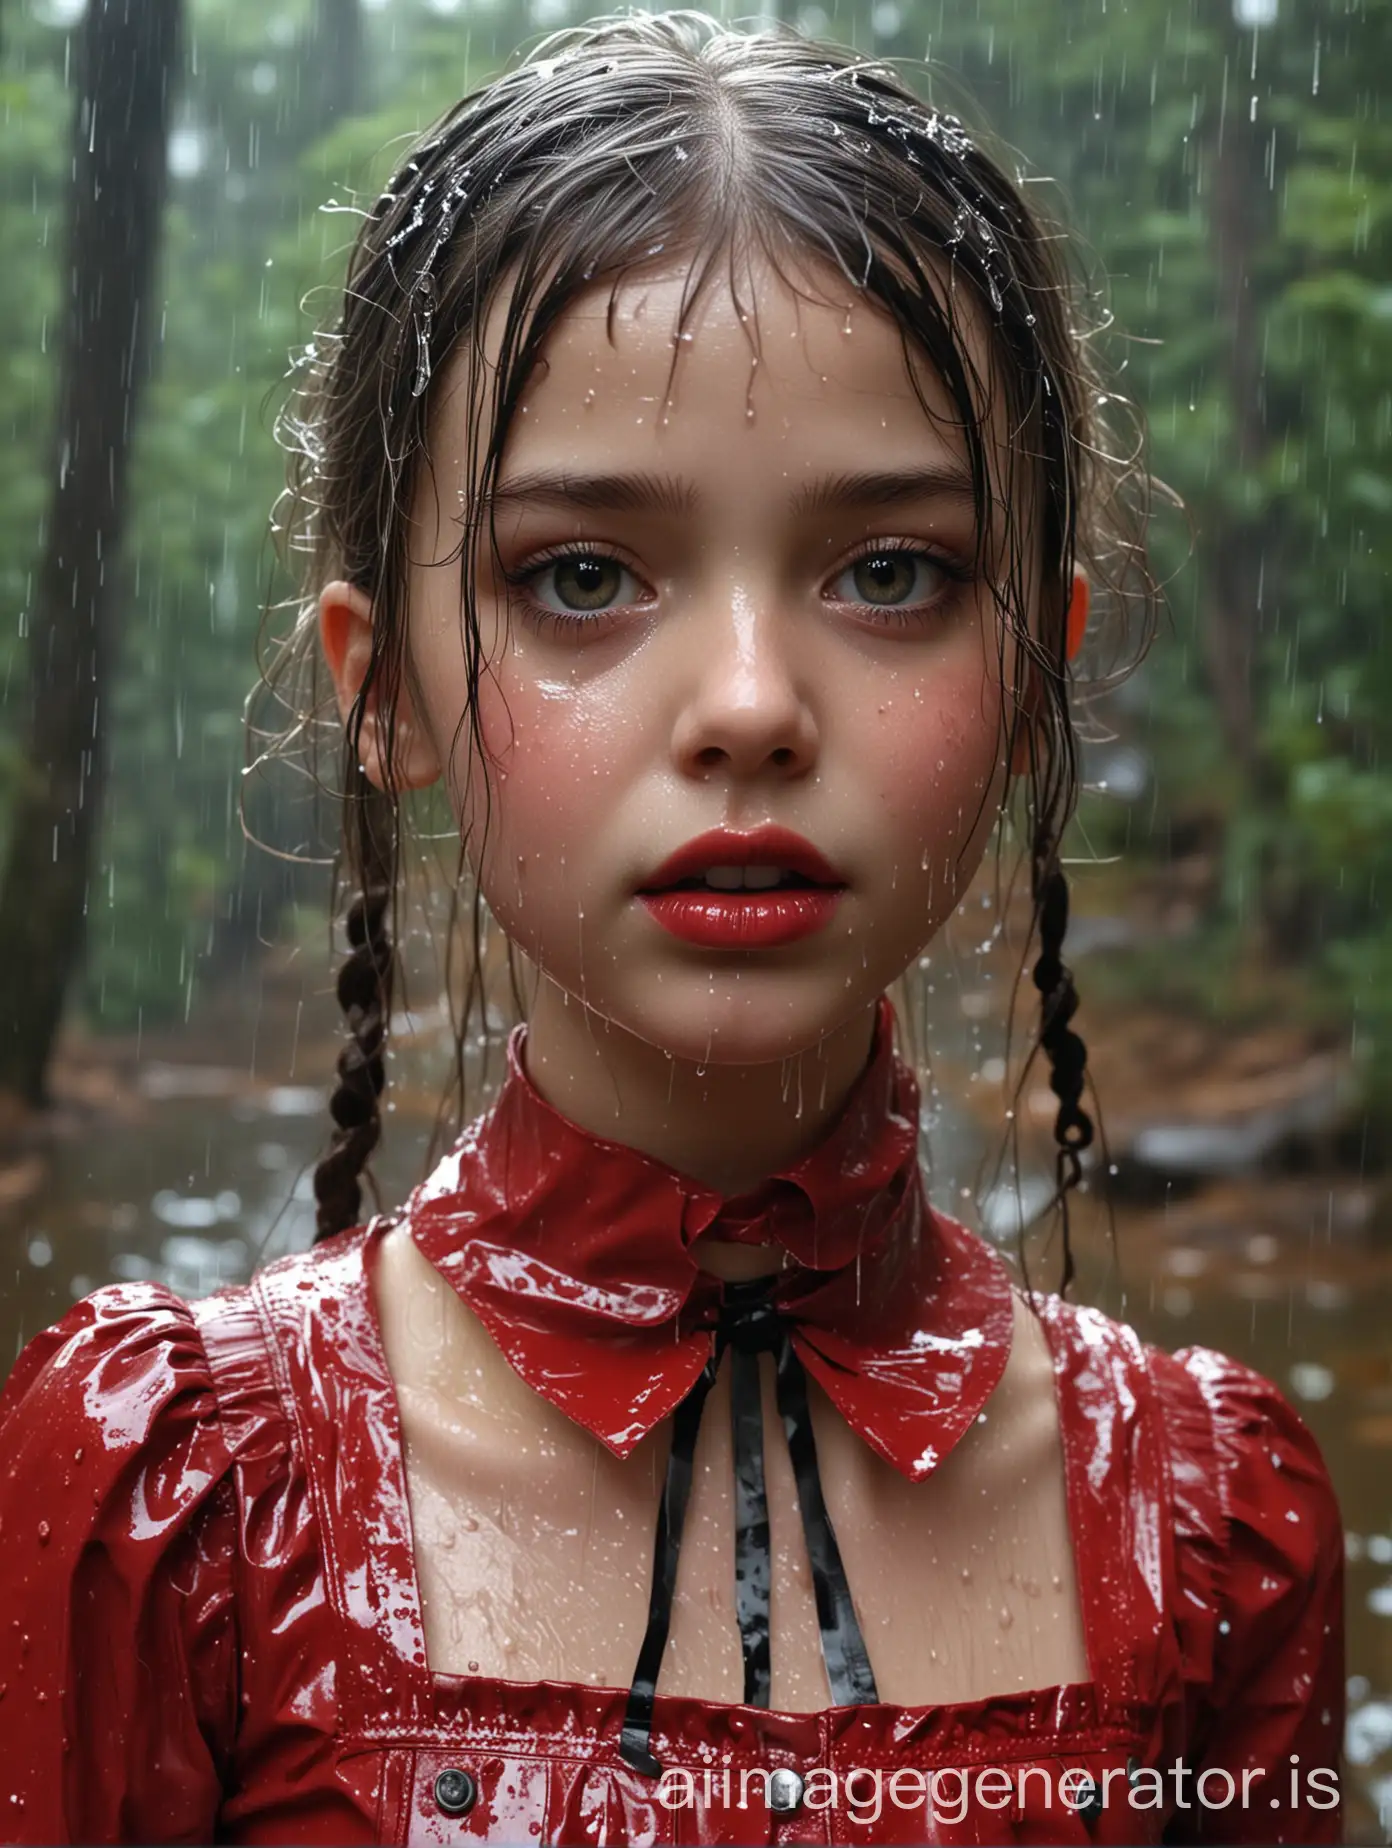 Rain-Soaked-French-Lolita-Girl-in-Glossy-Red-Latex-Outfit